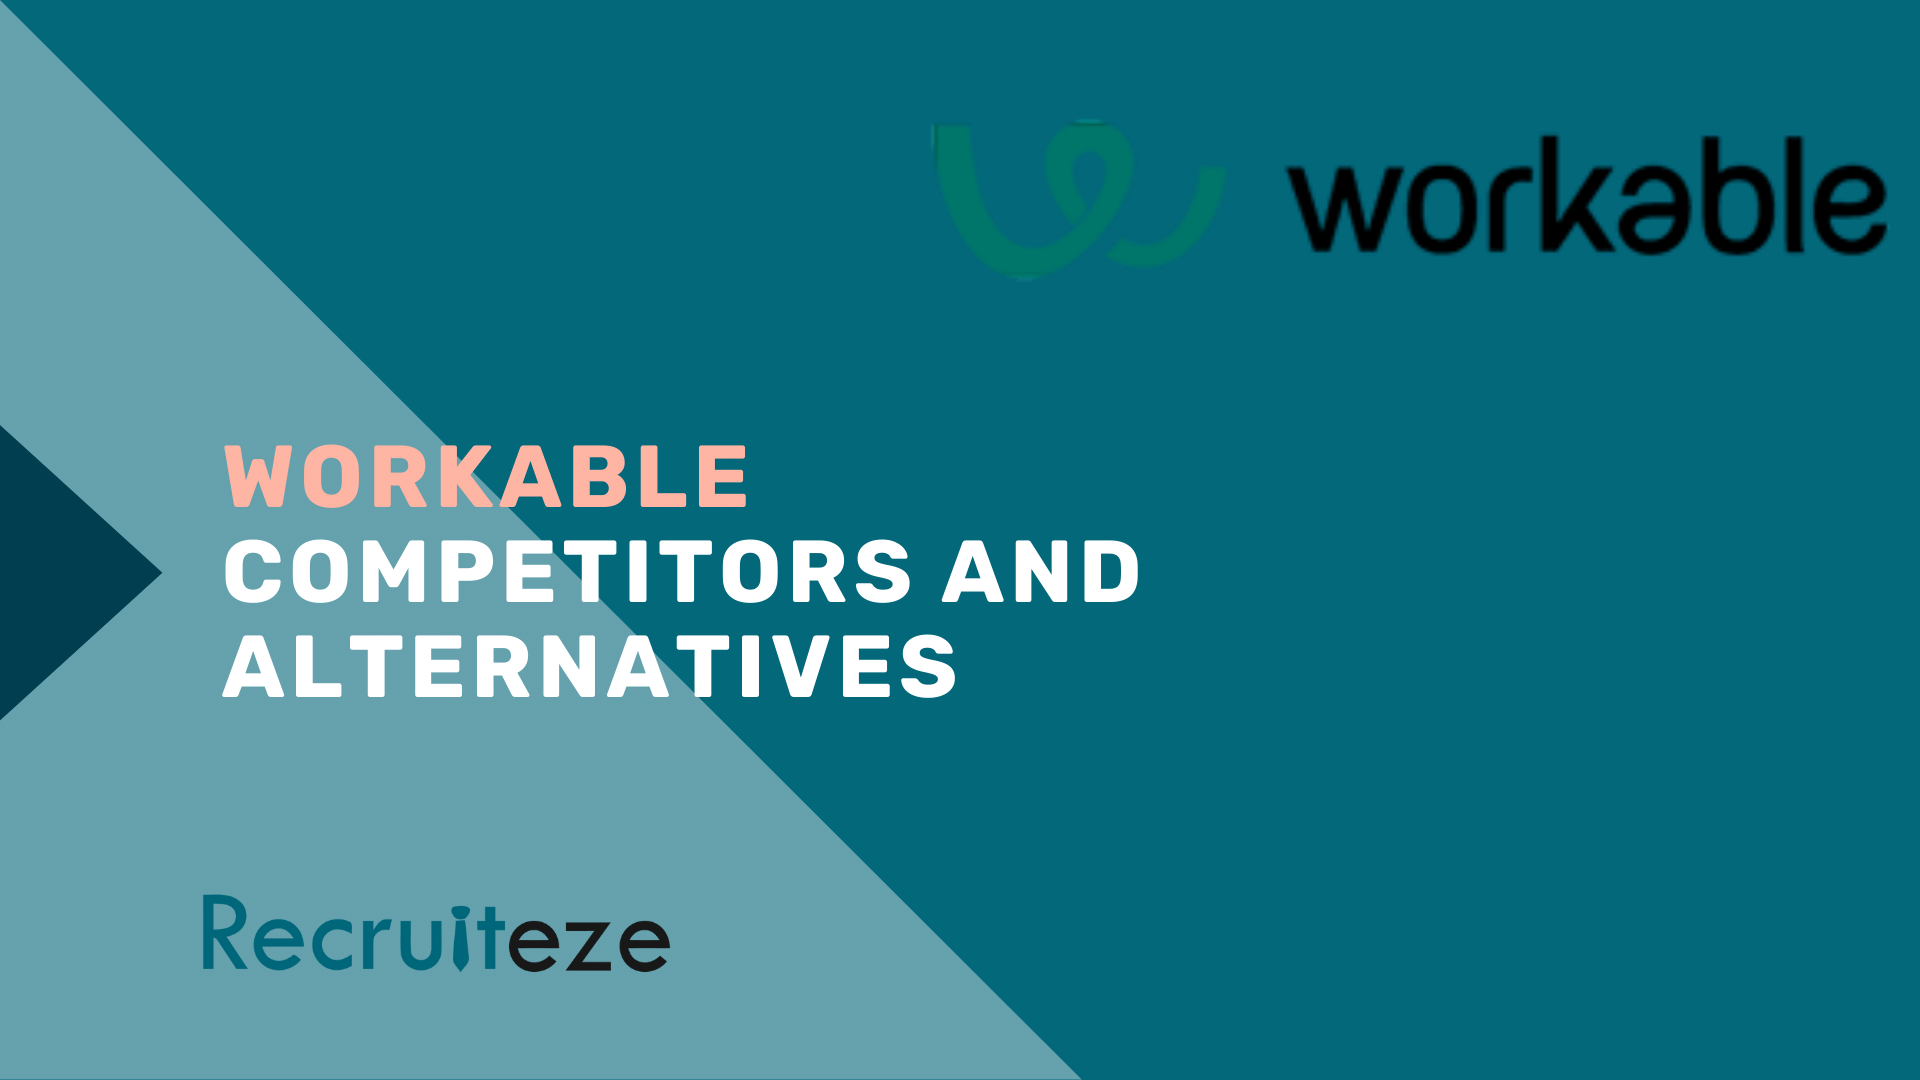 Workable Alternatives and Competitors